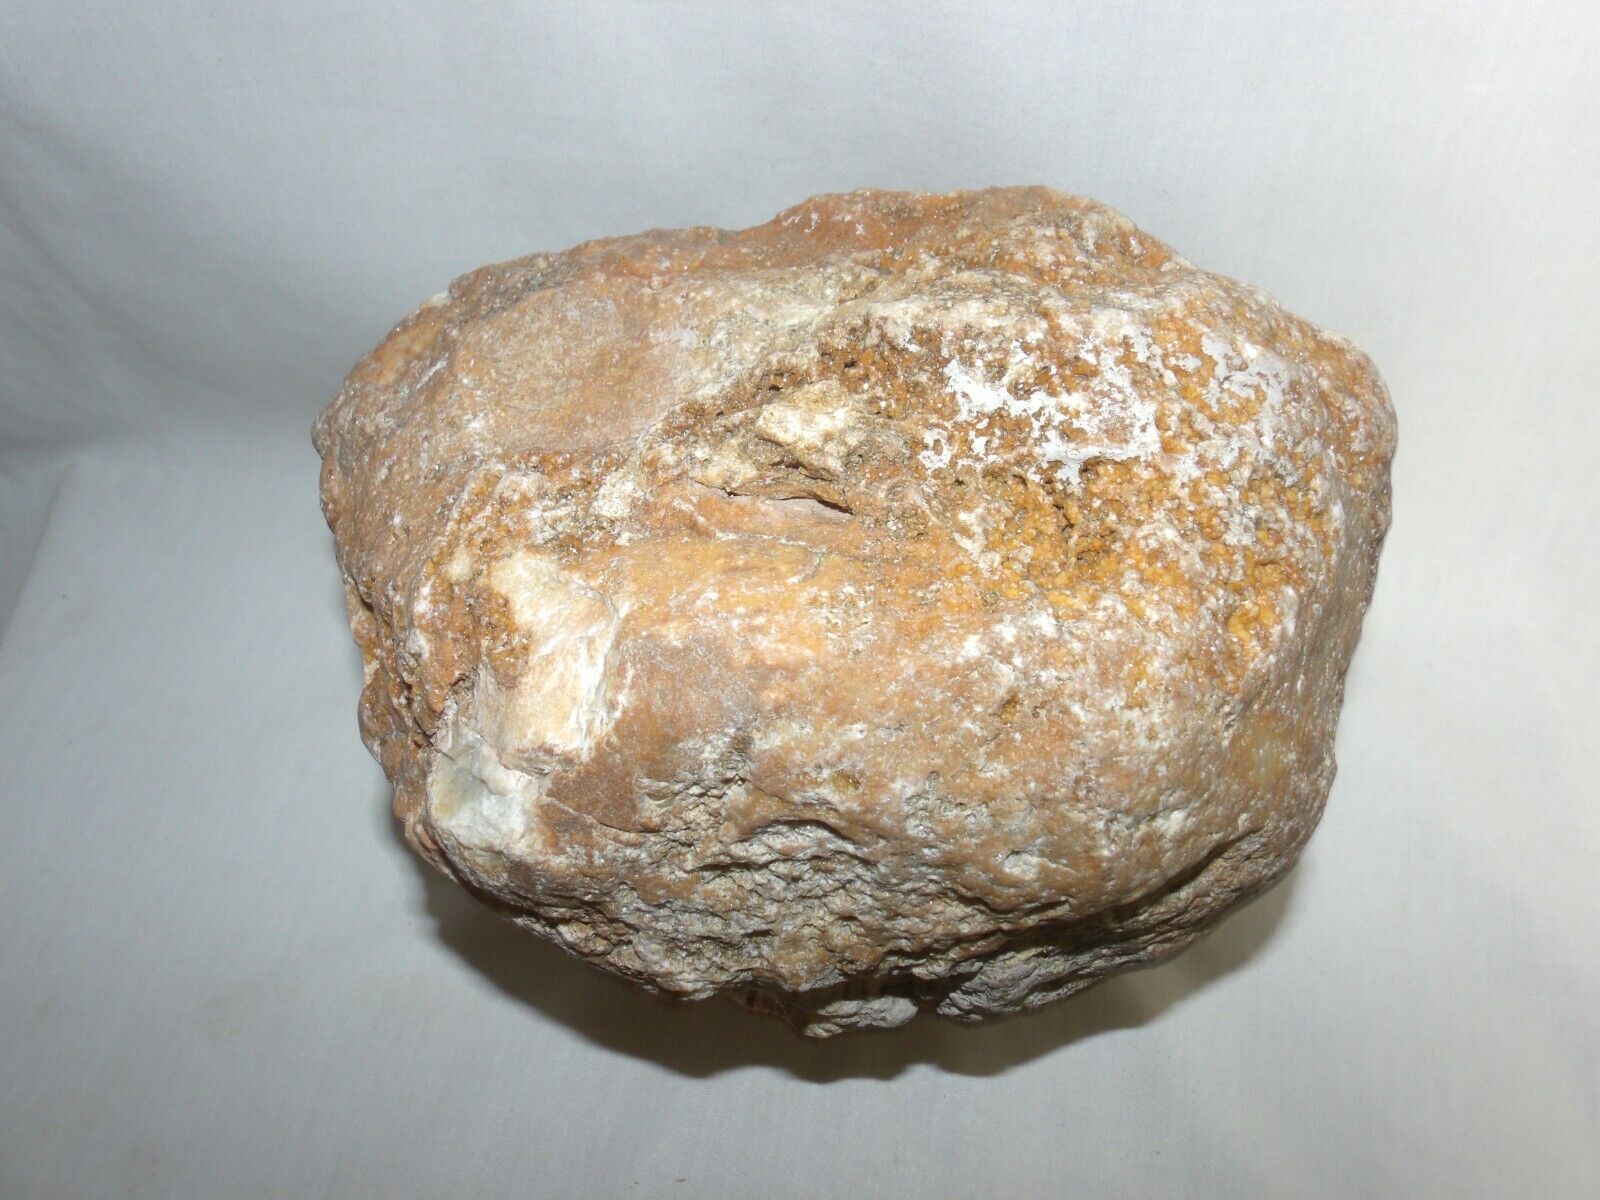 13 Pound Large Unopened Kentucky Geode Solid to Semi-Solid Unique Gift 9.5 Inch